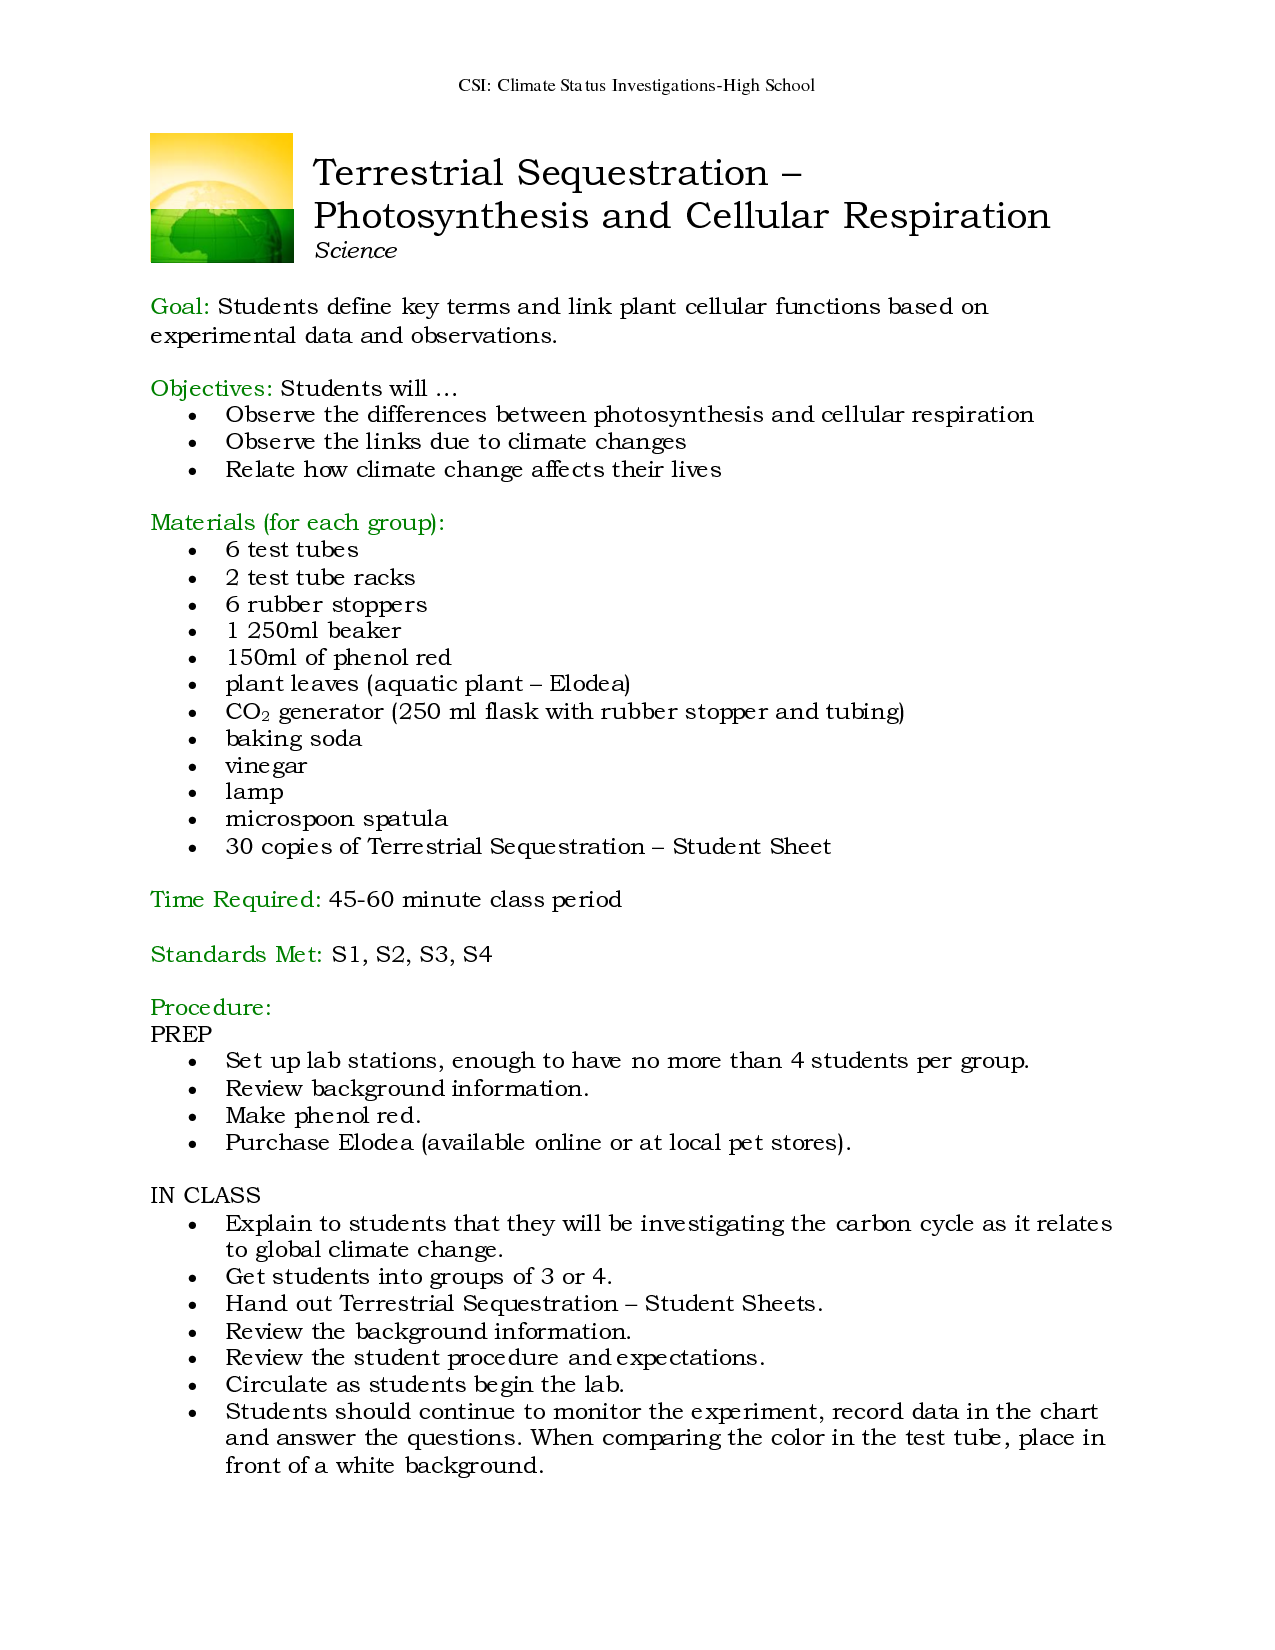 Photosynthesis and Cellular Respiration Worksheet Answers